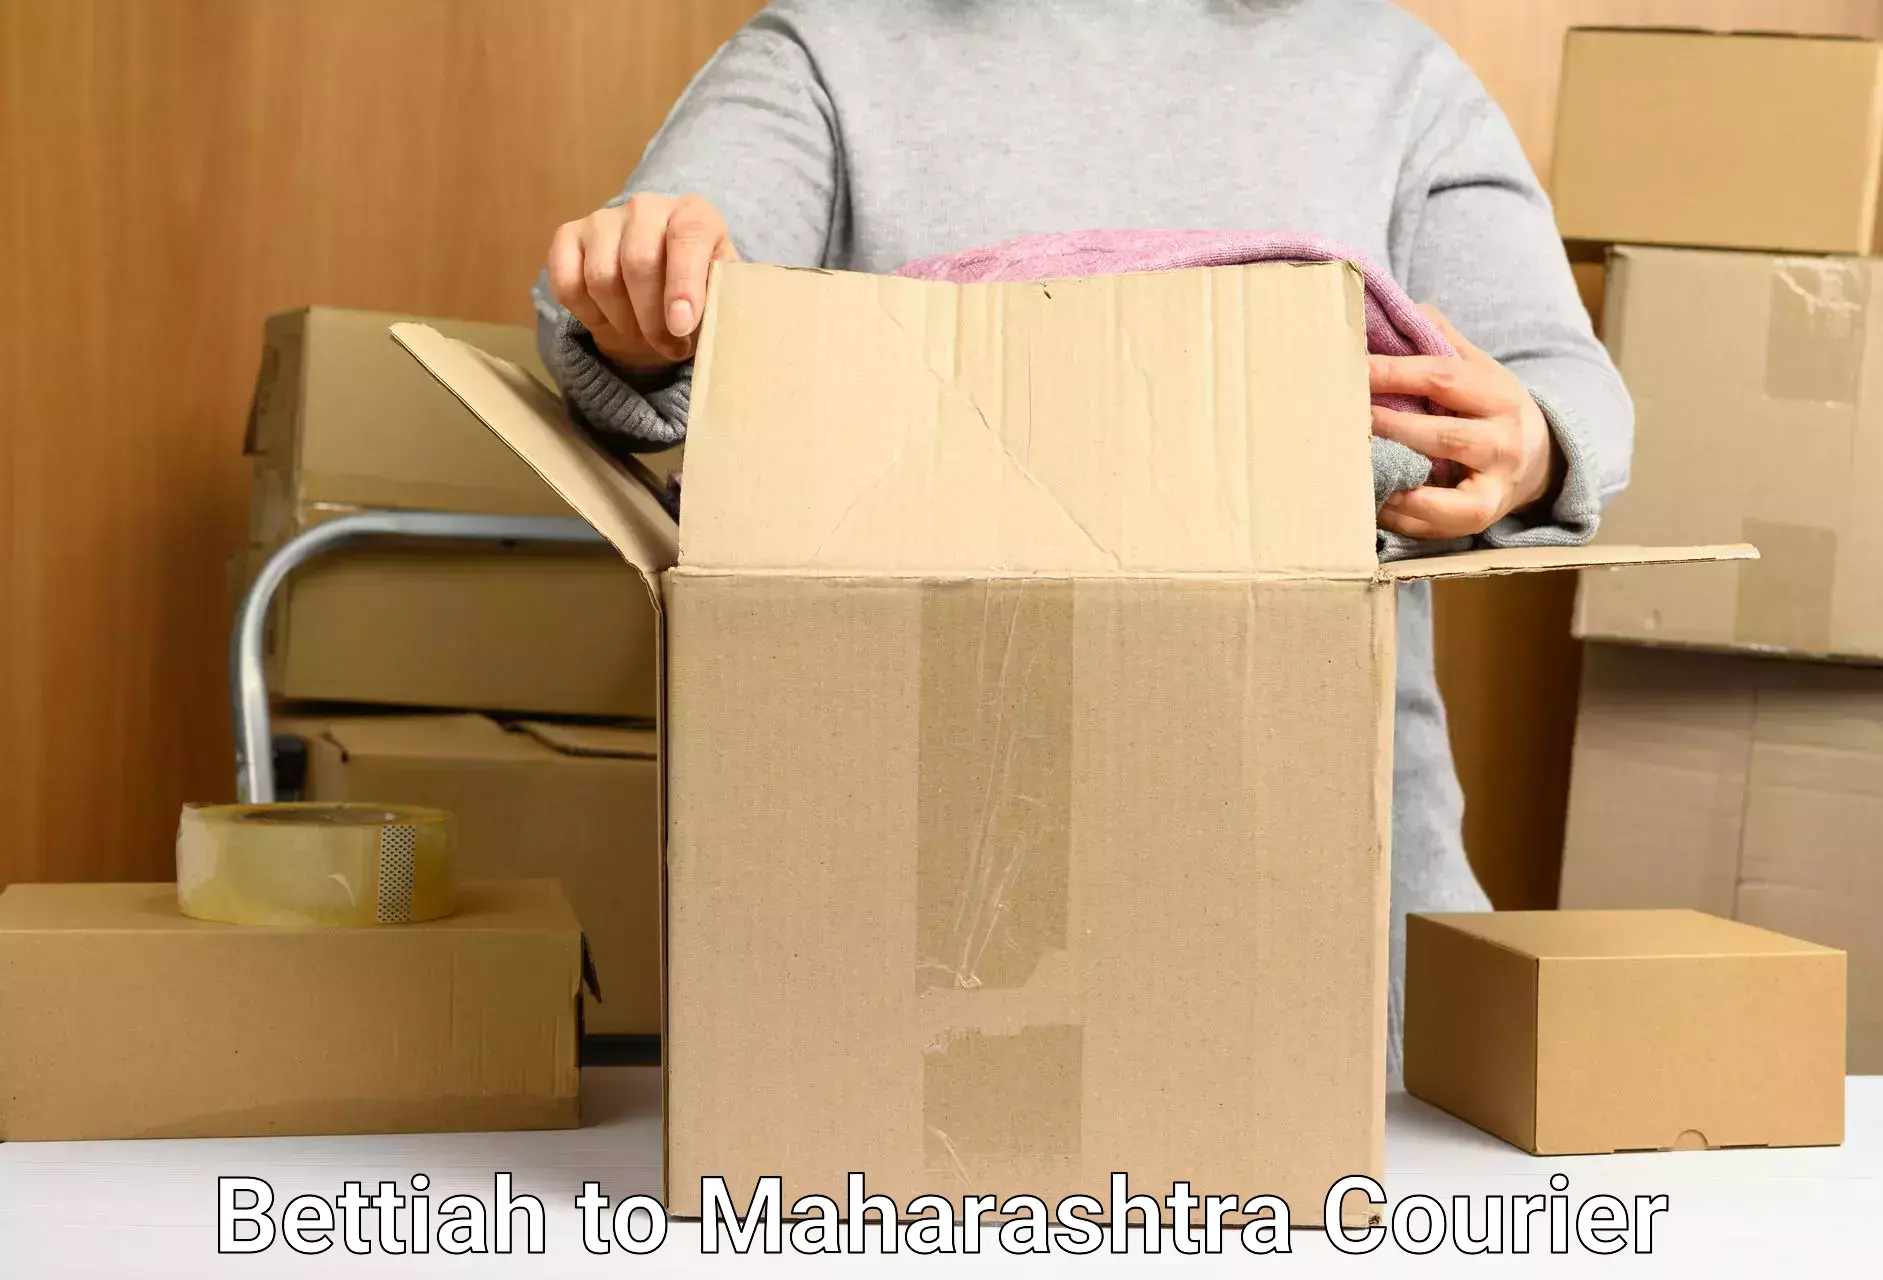 Custom courier packaging Bettiah to Parbhani